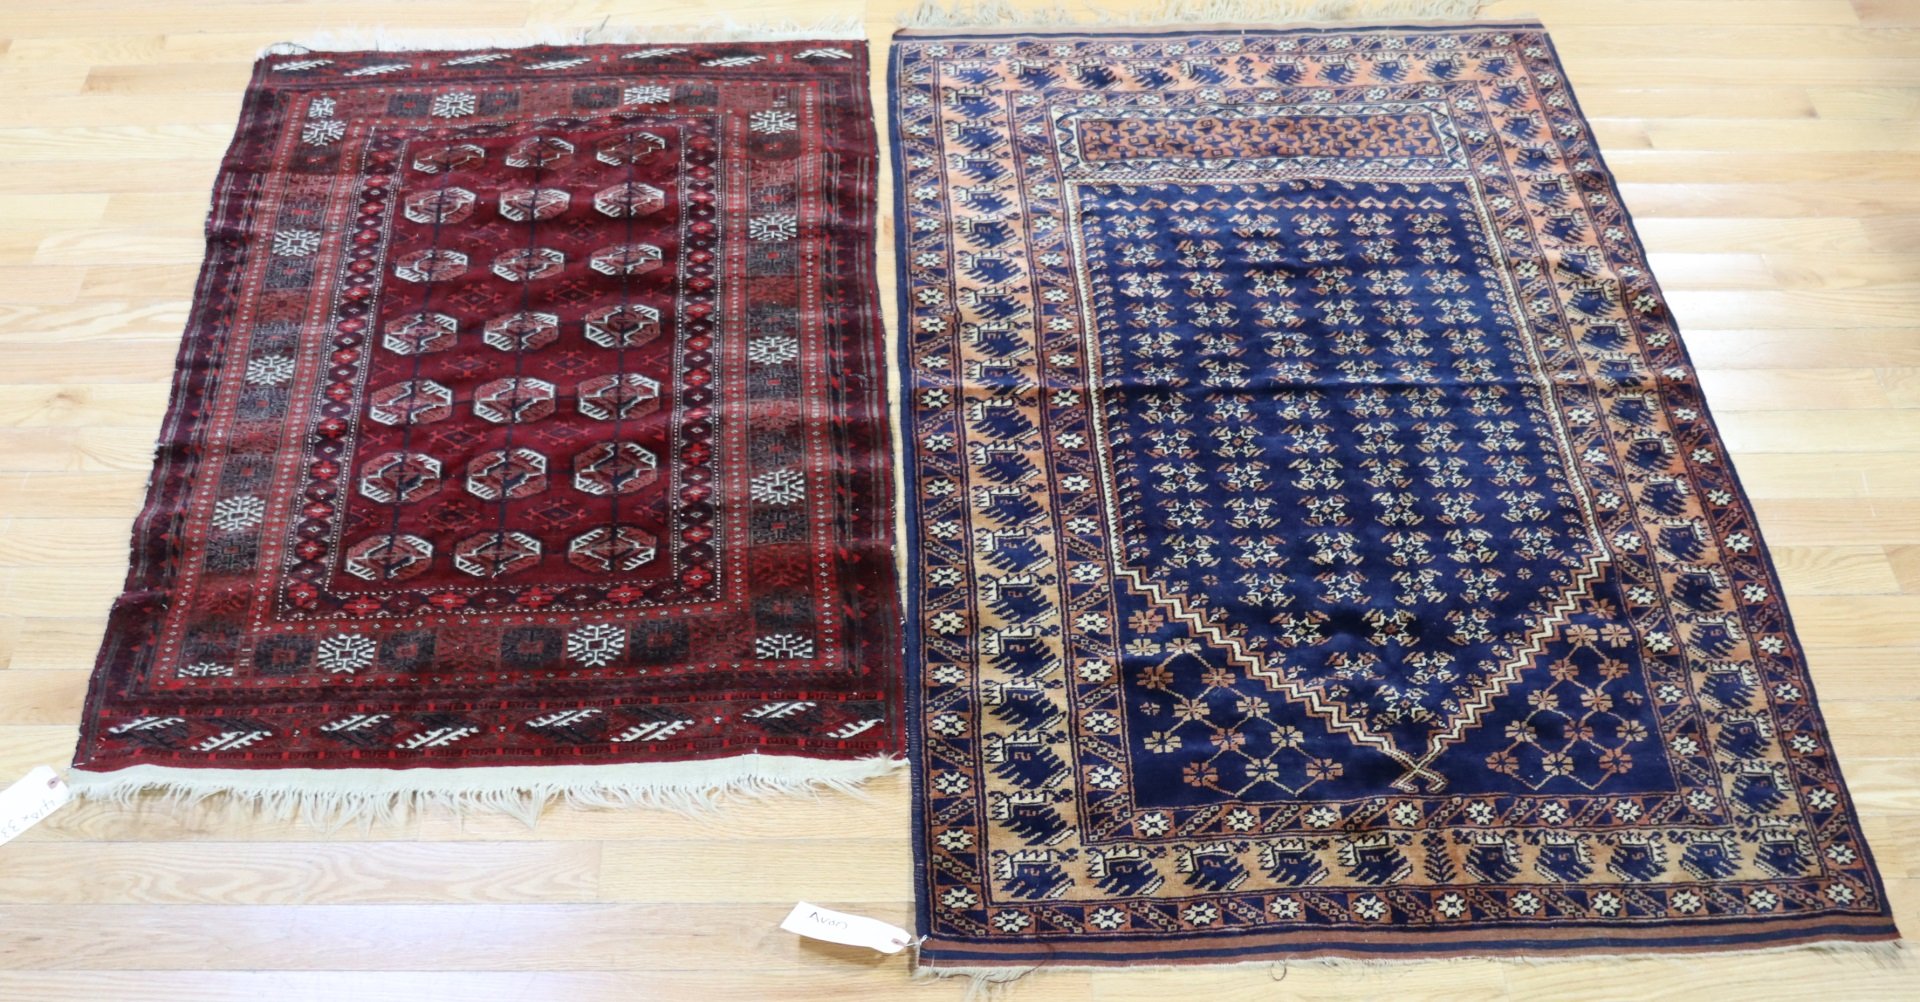 2 ANTIQUE AND FINELY HAND WOVEN 3bdca7